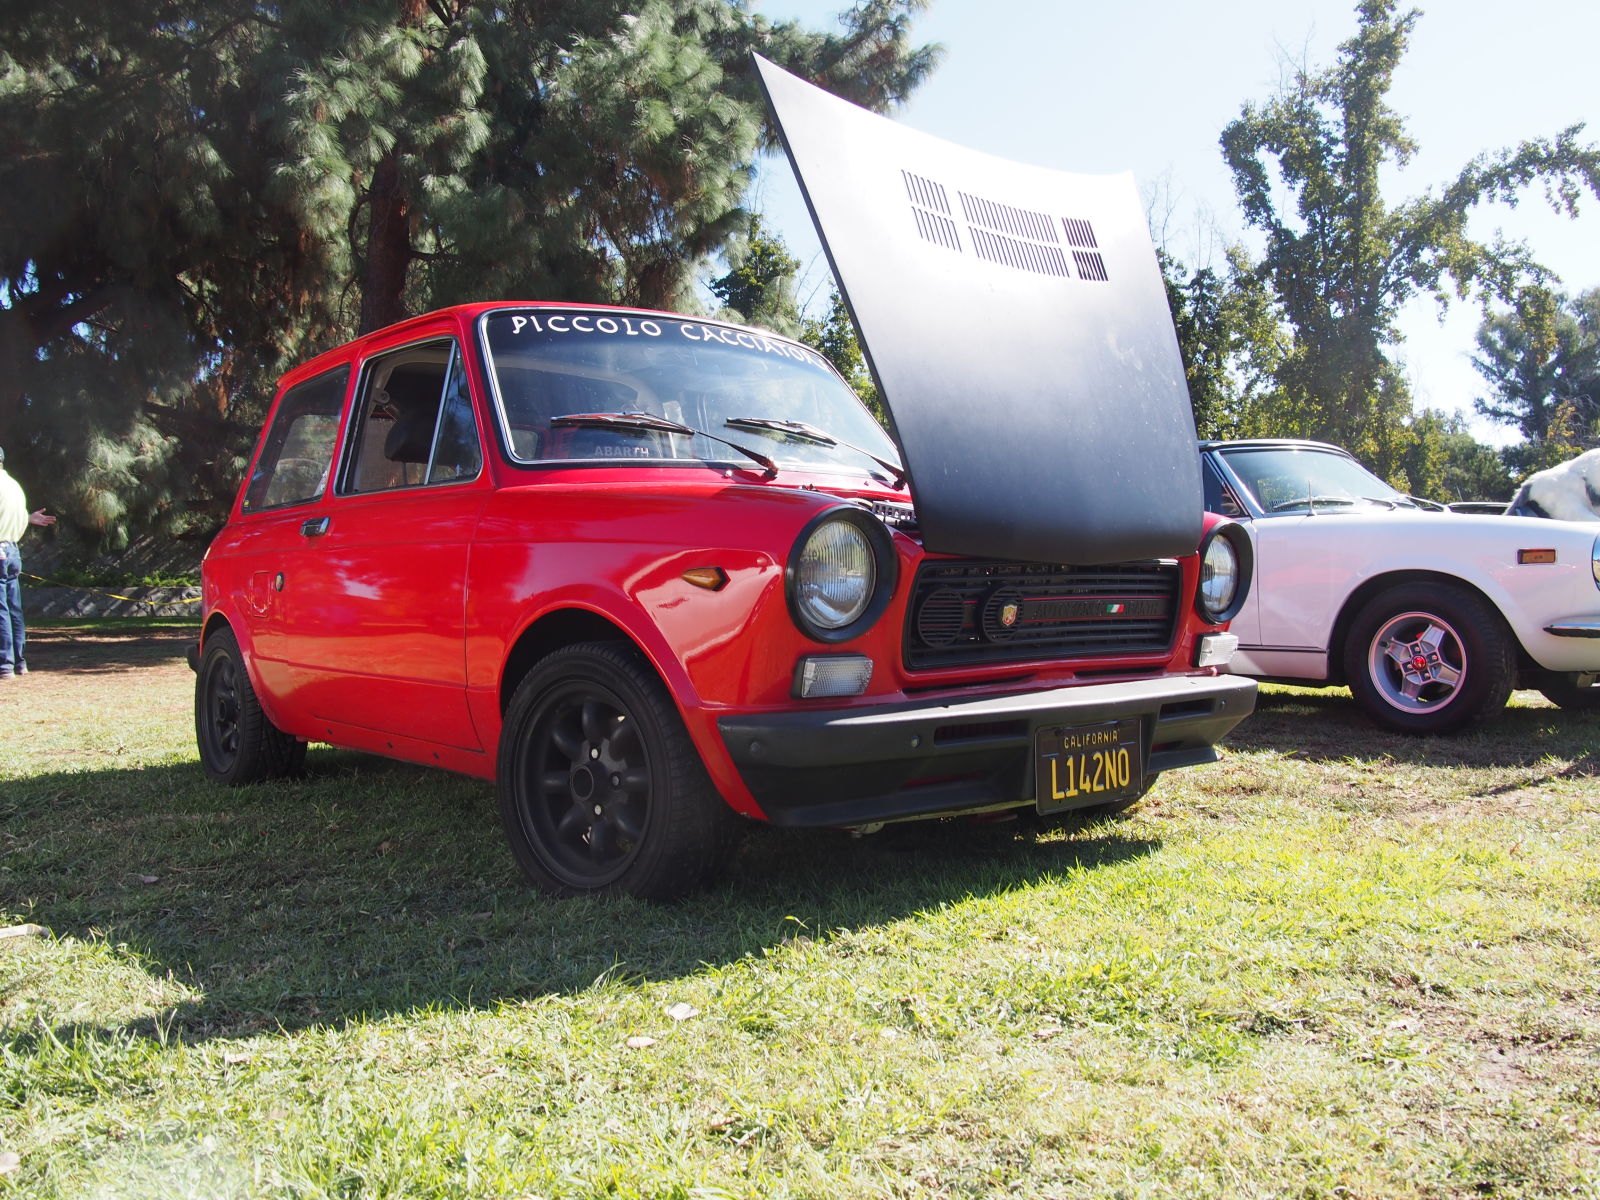 I imagine this Autobianchi A112 was the funnest to hoon car there.